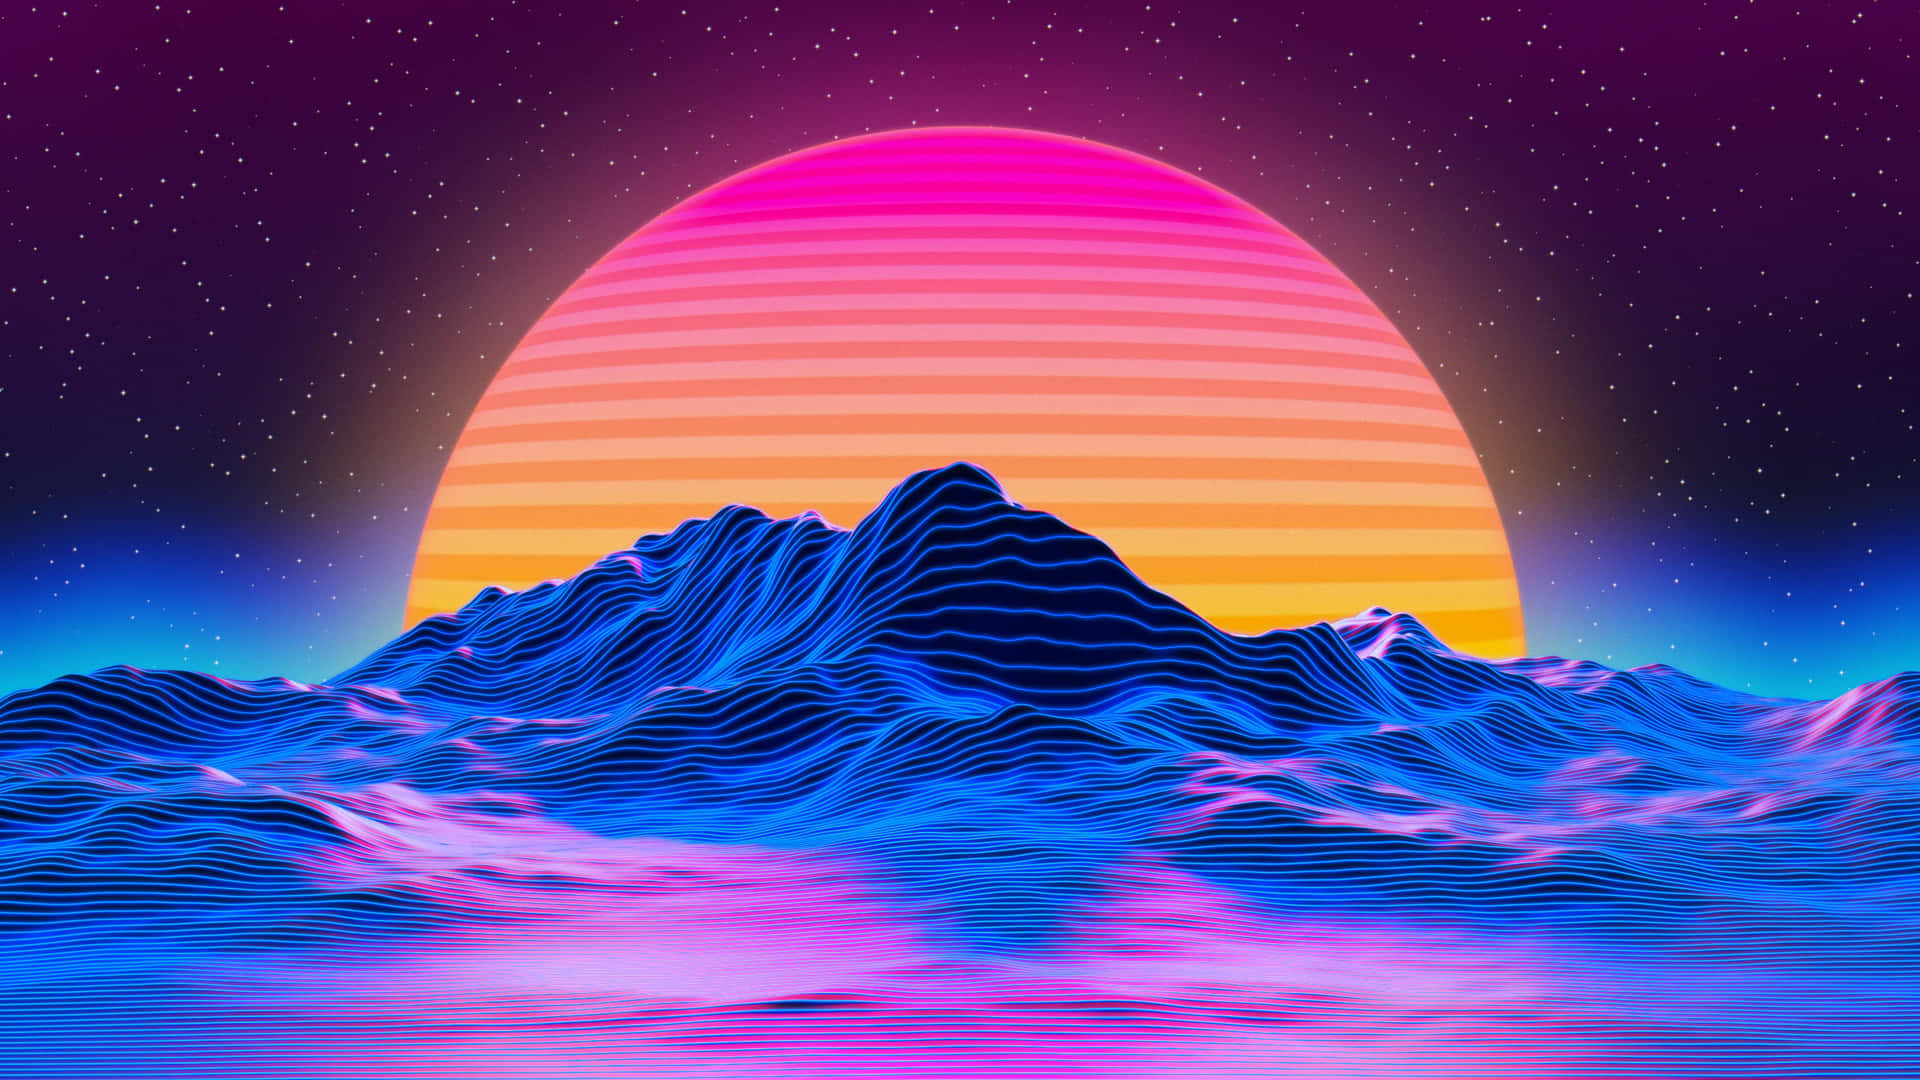 Enjoy a blissful moment with a tranquil, retro sunset Wallpaper